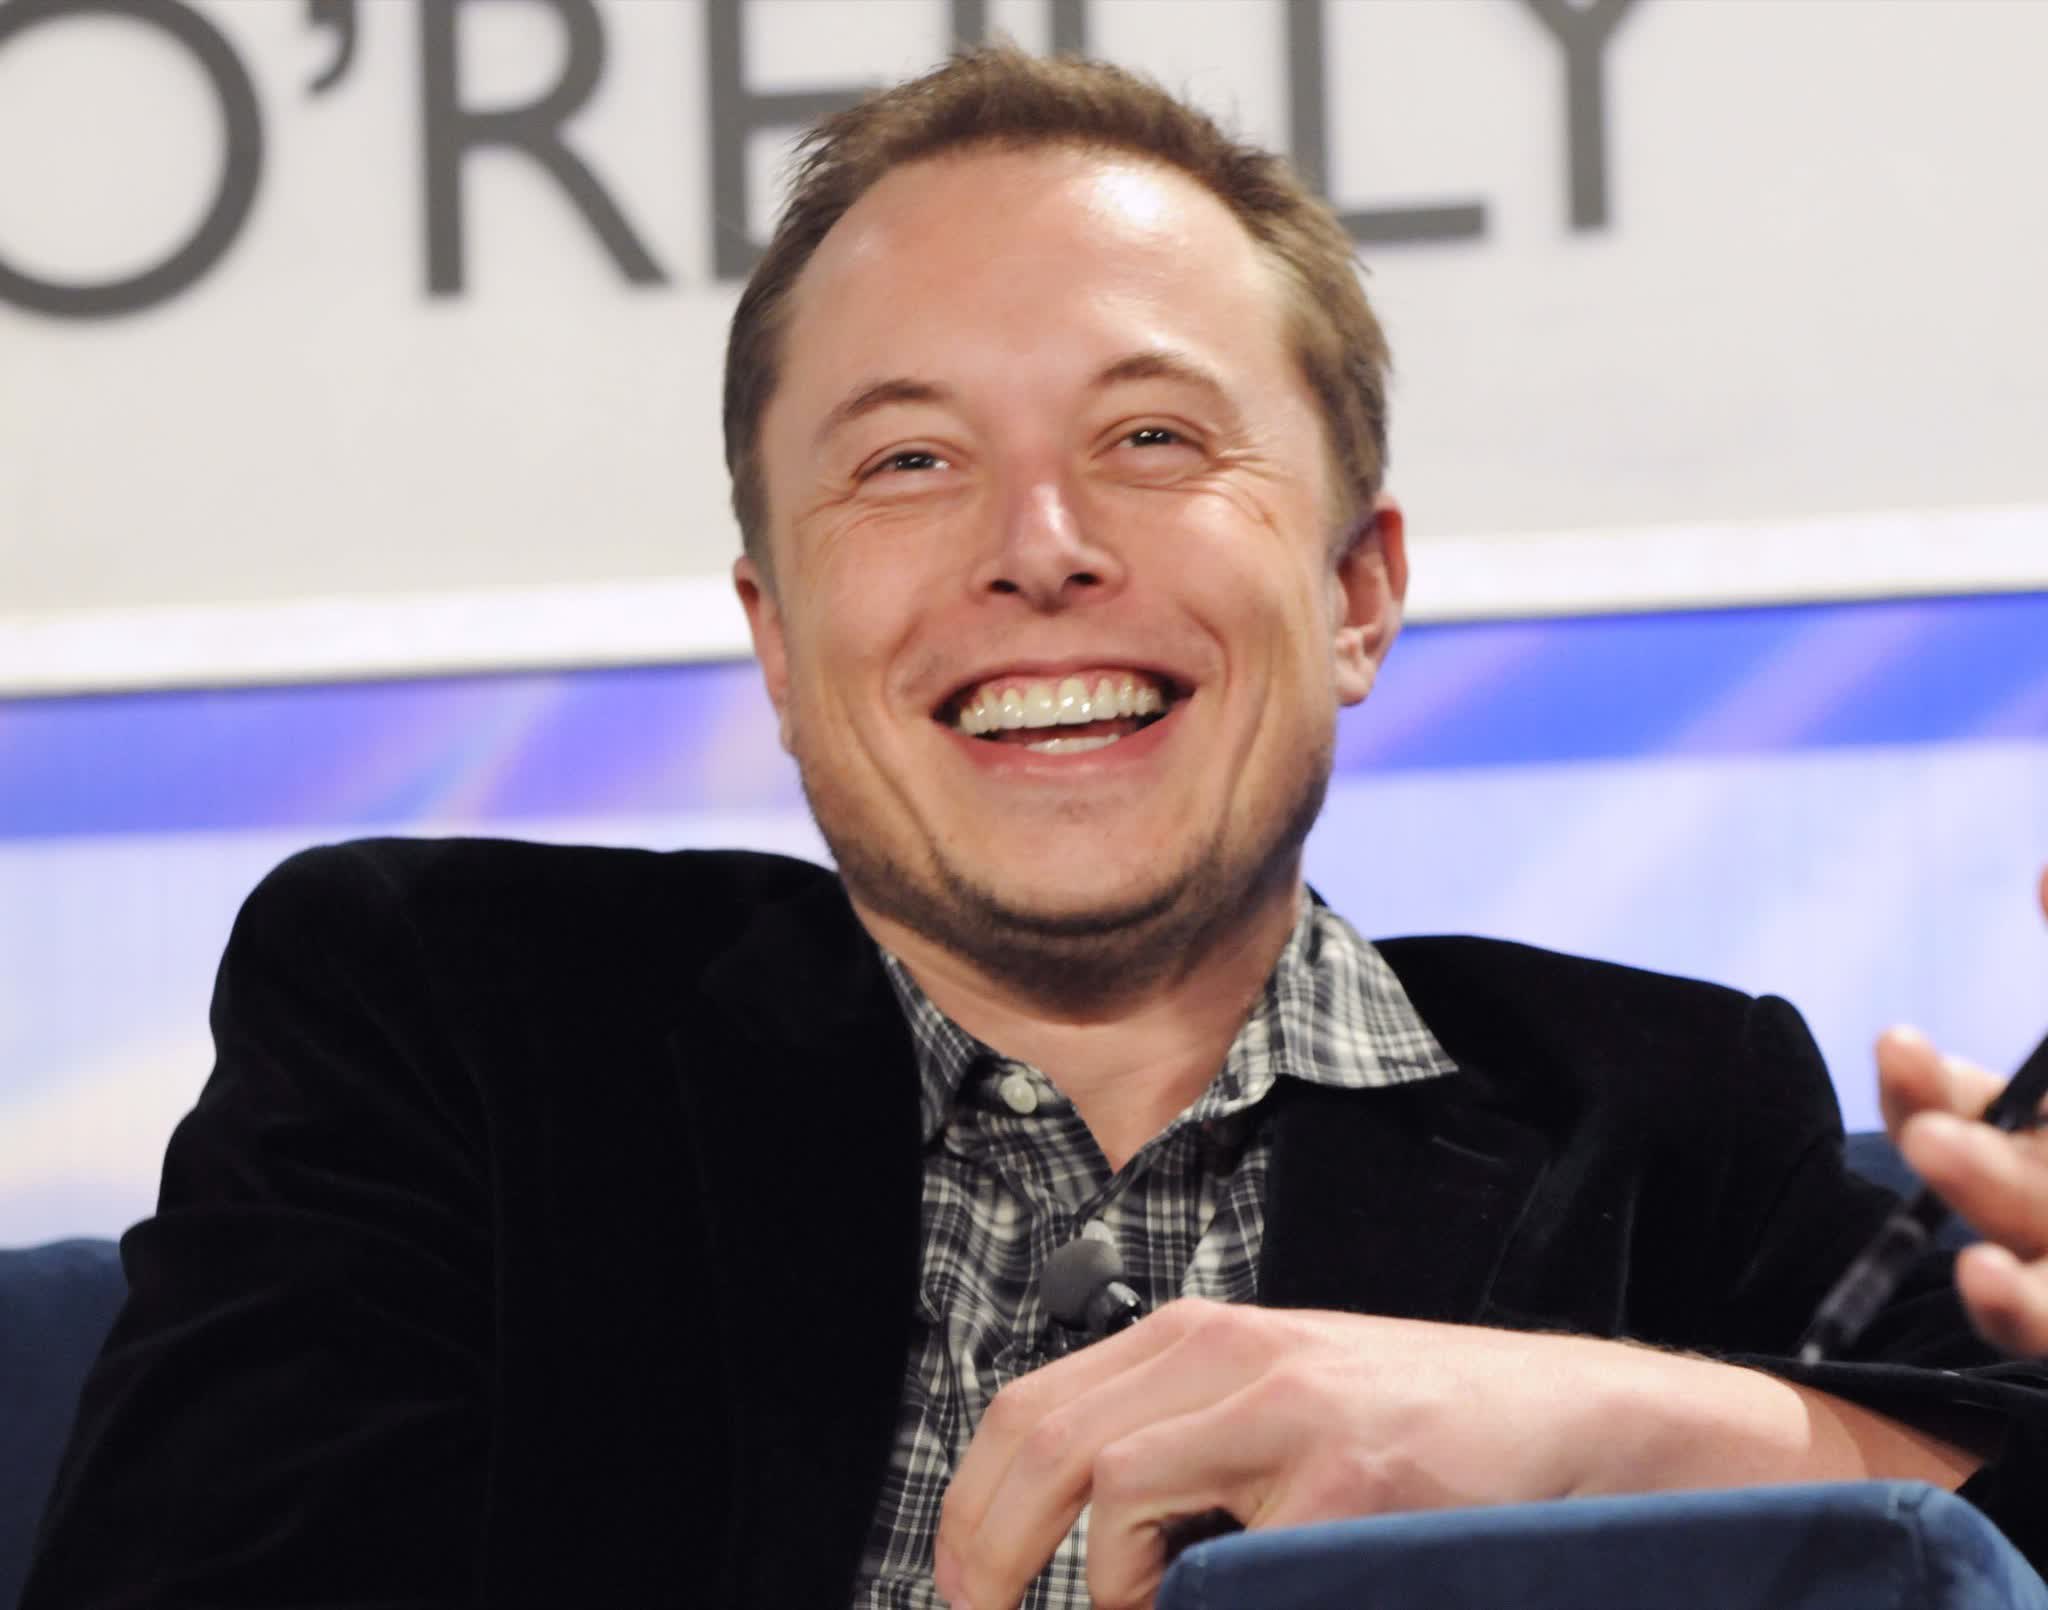 Elon Musk fires Twitter engineer for arguing with him publicly